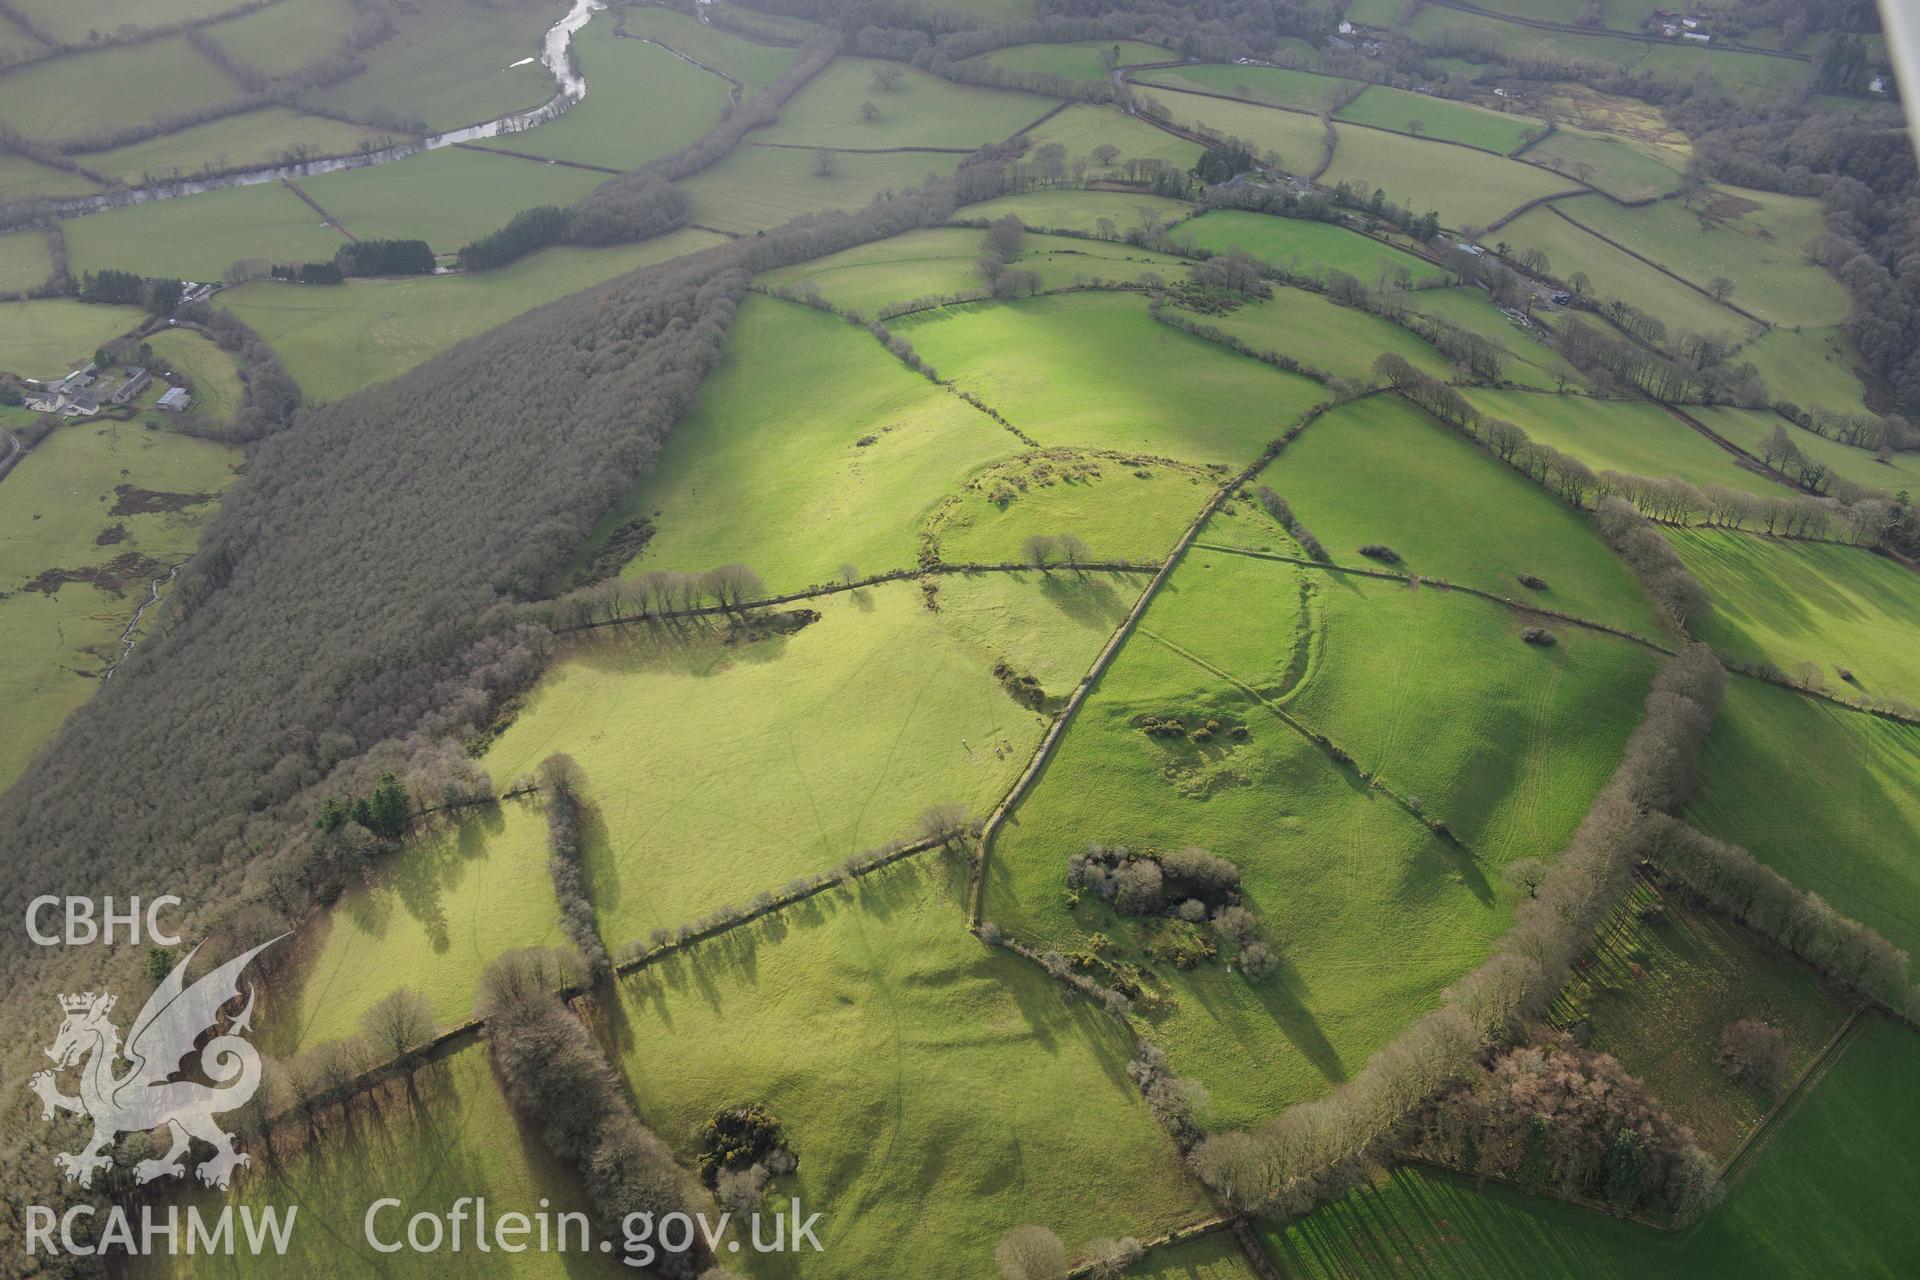 Pencoed-Foel Hillfort. Oblique aerial photograph taken during the Royal Commission's programme of archaeological aerial reconnaissance by Toby Driver on 6th January 2015.